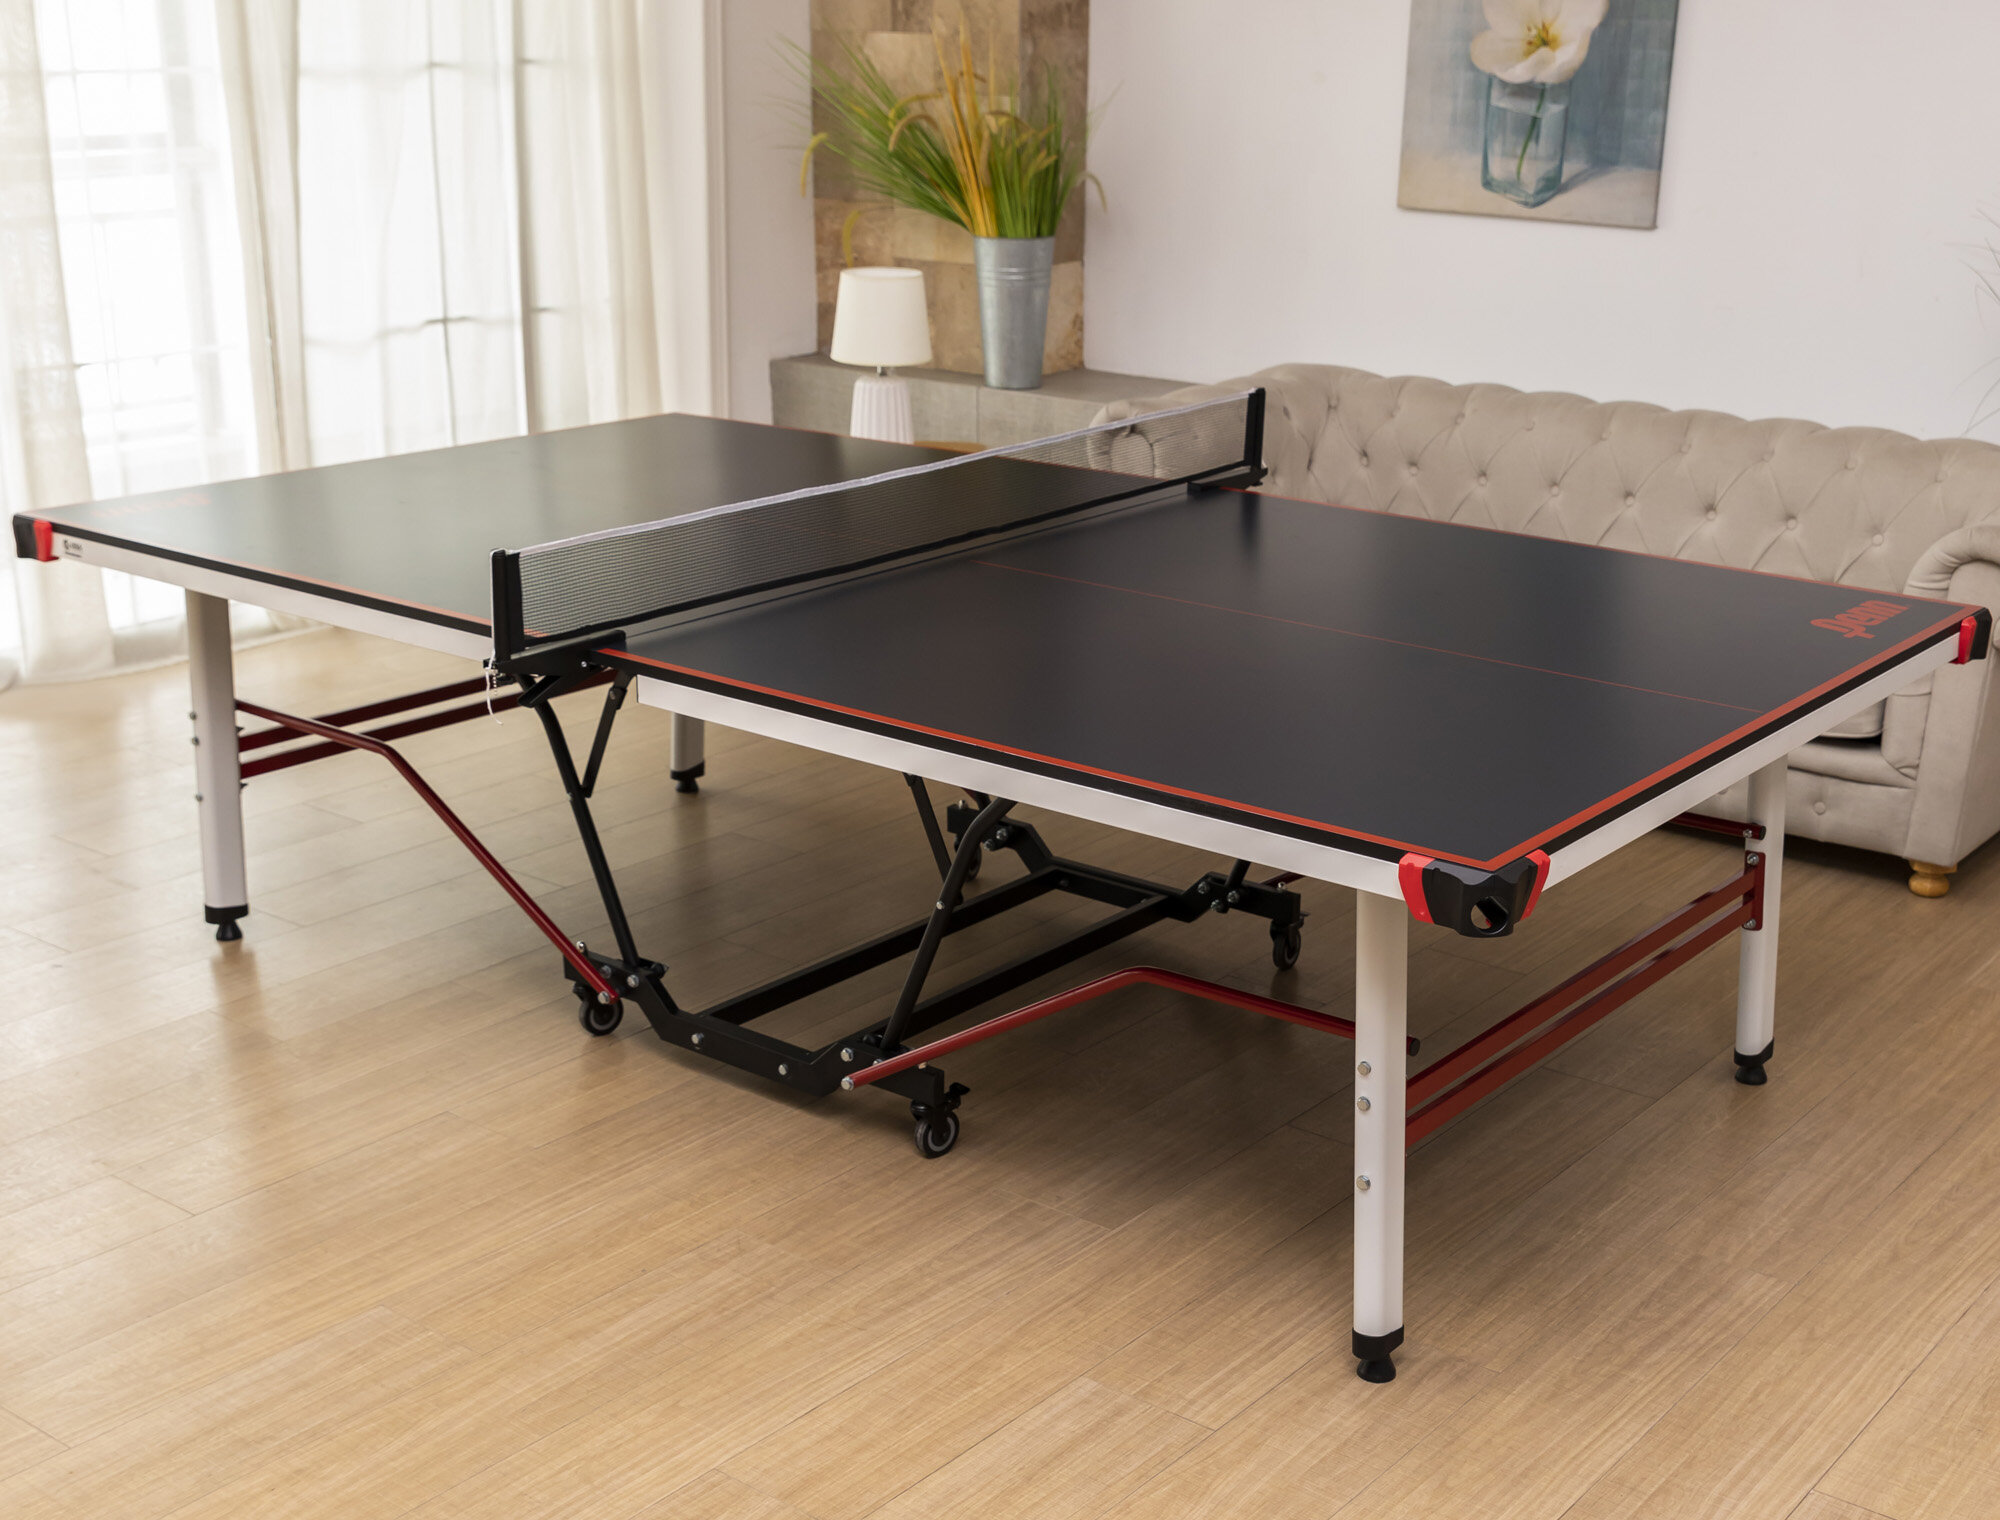 EastPoint Everywhere Table Tennis/Ping Pong Set w/ Retractable Net